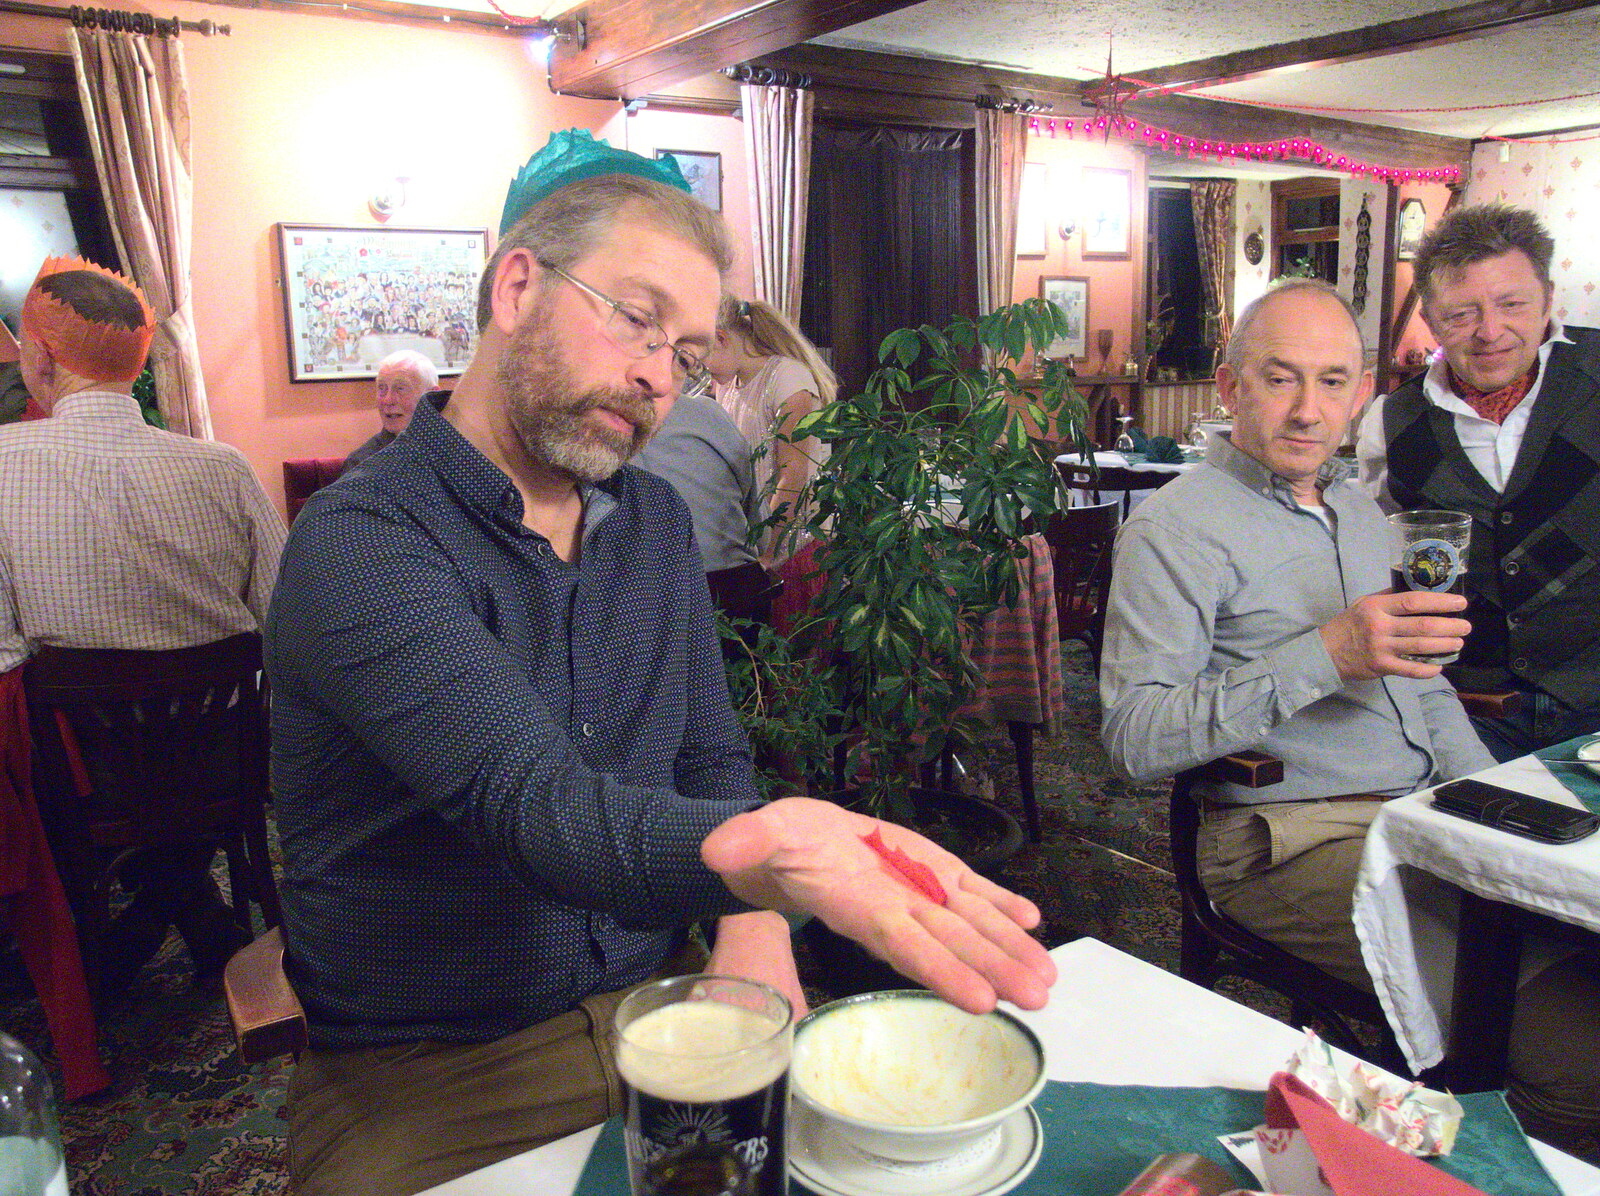 The BSCC Christmas Dinner at The Swan Inn, Brome, Suffolk - 3rd December 2016: Marc does the cellophane fish thing